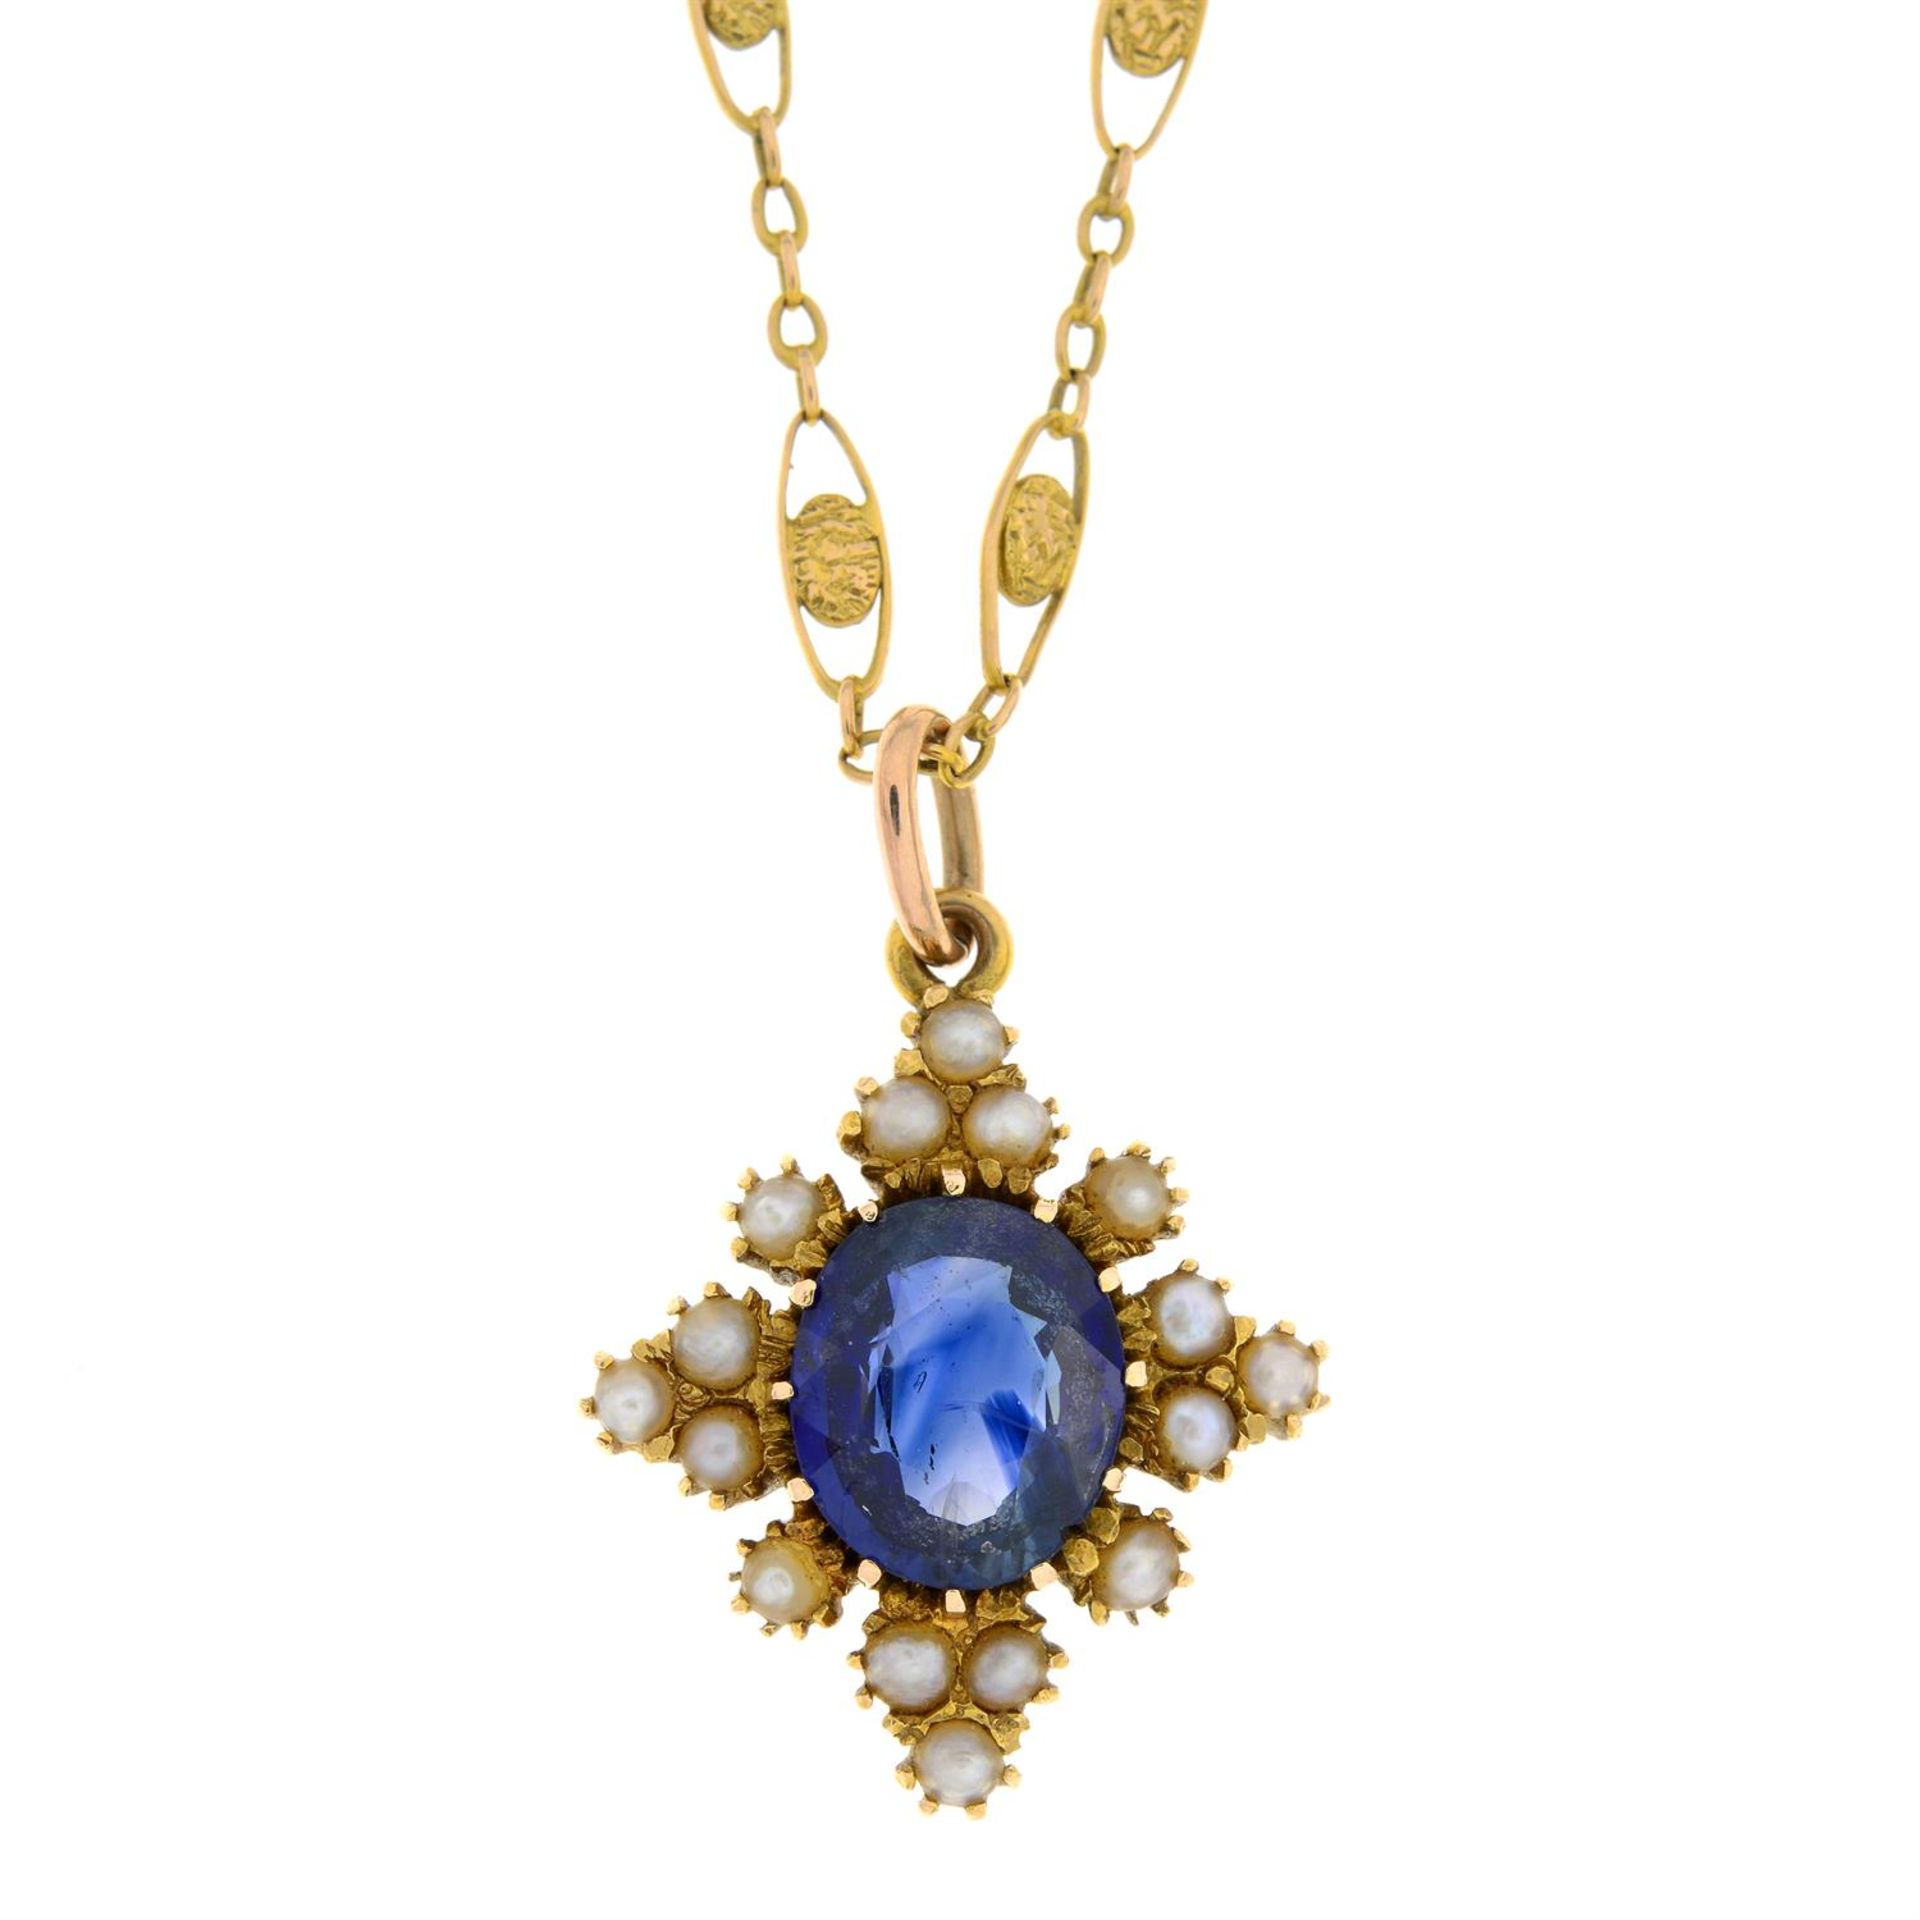 15ct gold sapphire and split pearl pendant and chain - Image 4 of 6